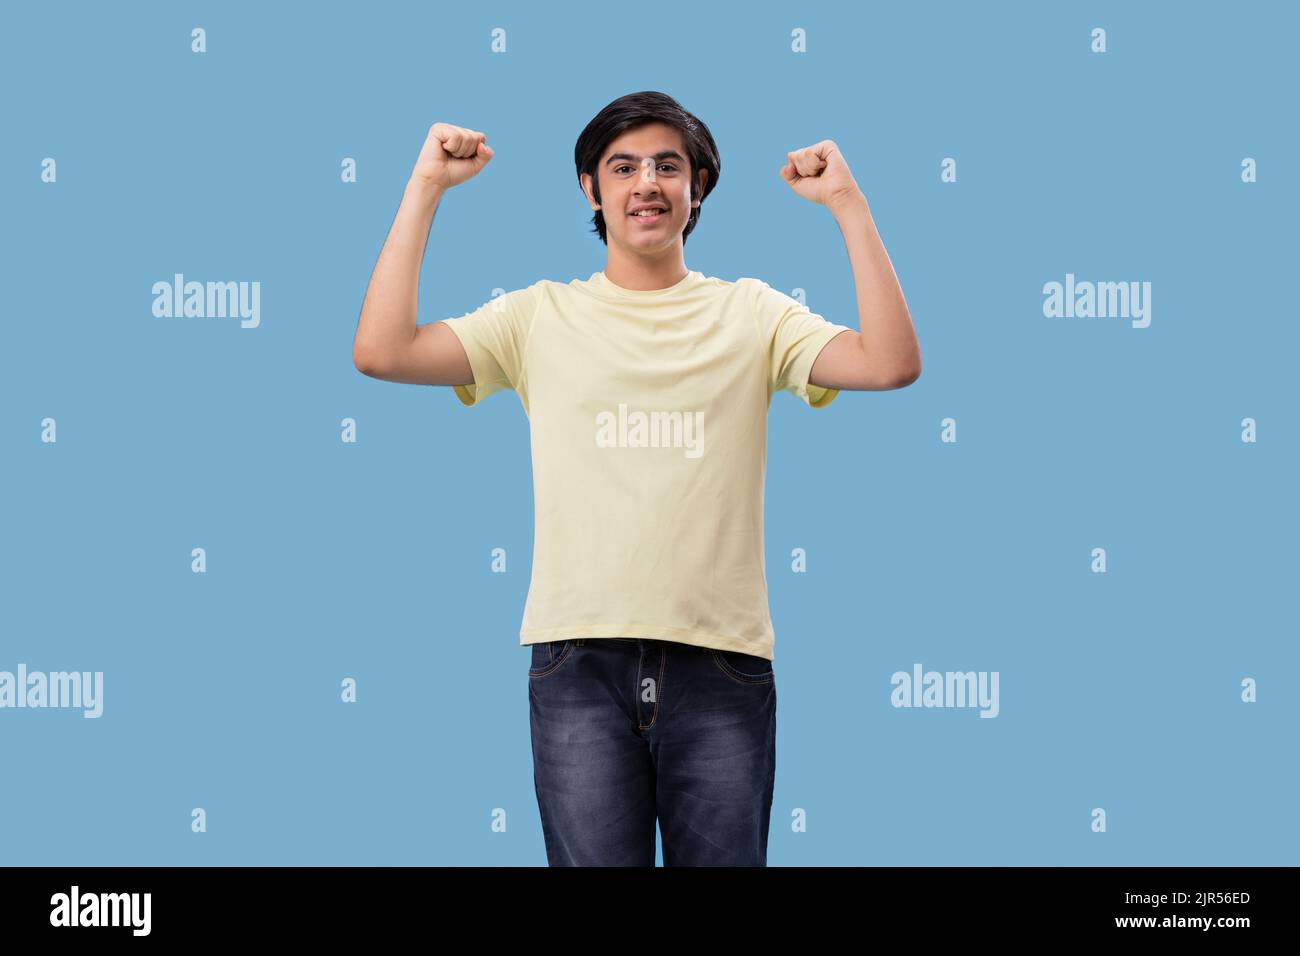 Portrait of a teenage boy cheering against blue background Stock Photo